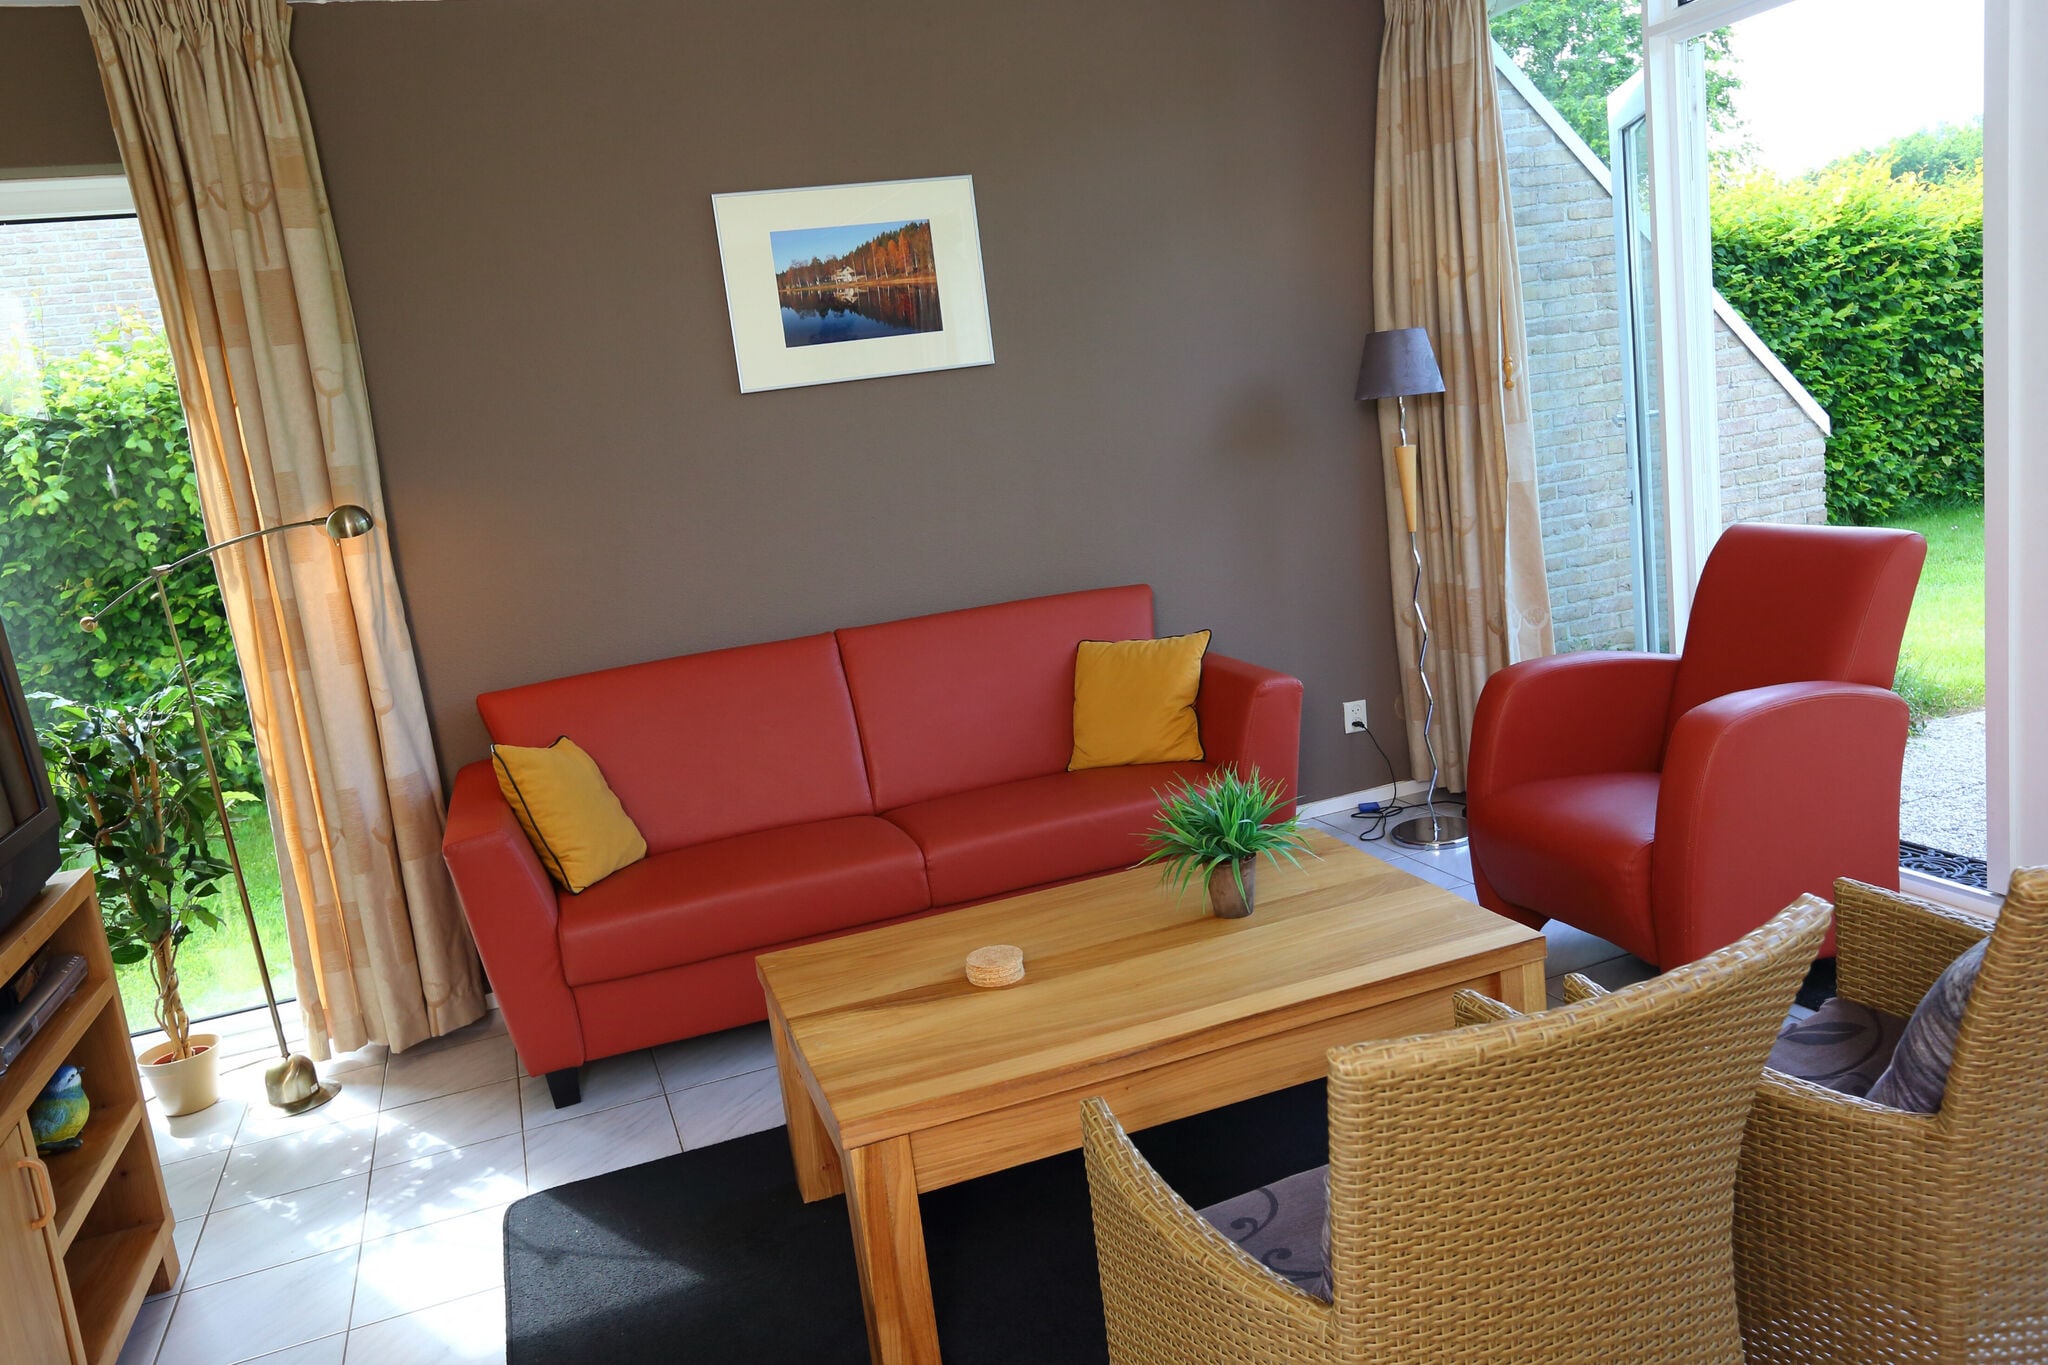 Tidy holiday home with WiFi, located near the Emslandermeer